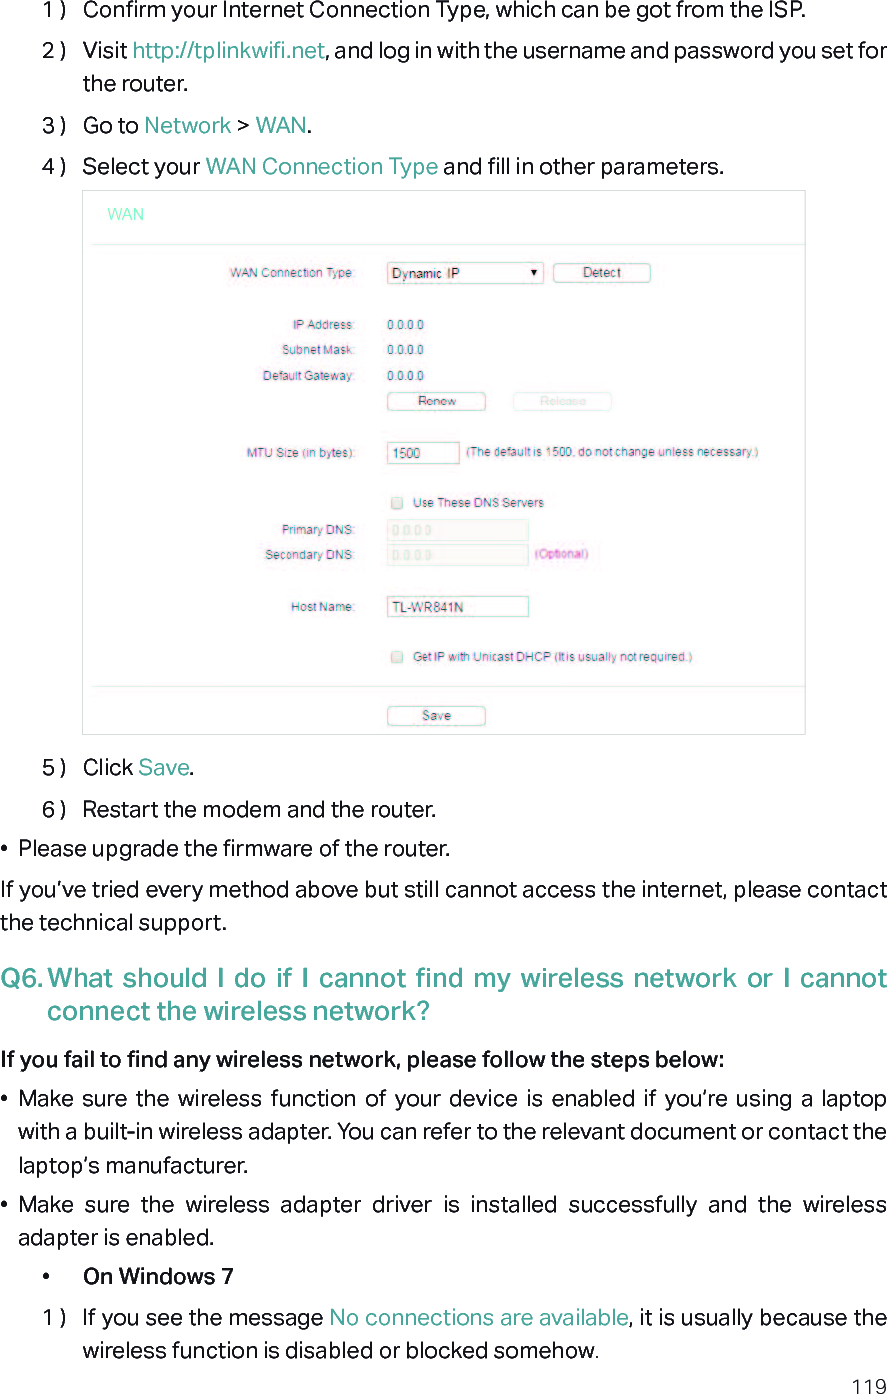 1191 )  Confirm your Internet Connection Type, which can be got from the ISP.2 )  Visit http://tplinkwifi.net, and log in with the username and password you set for the router.3 )  Go to Network &gt; WAN.4 )  Select your WAN Connection Type and fill in other parameters.5 )  Click Save.6 )  Restart the modem and the router.•  Please upgrade the firmware of the router.If you’ve tried every method above but still cannot access the internet, please contact the technical support.Q6. What  should  I  do  if  I  cannot  find  my  wireless network  or  I  cannot connect the wireless network?If you fail to find any wireless network, please follow the steps below:•  Make sure  the  wireless  function  of  your  device  is  enabled  if  you’re  using  a  laptop with a built-in wireless adapter. You can refer to the relevant document or contact the laptop’s manufacturer.•  Make  sure  the  wireless  adapter  driver  is  installed  successfully  and  the  wireless adapter is enabled.•  On Windows 71 )  If you see the message No connections are available, it is usually because the wireless function is disabled or blocked somehow.